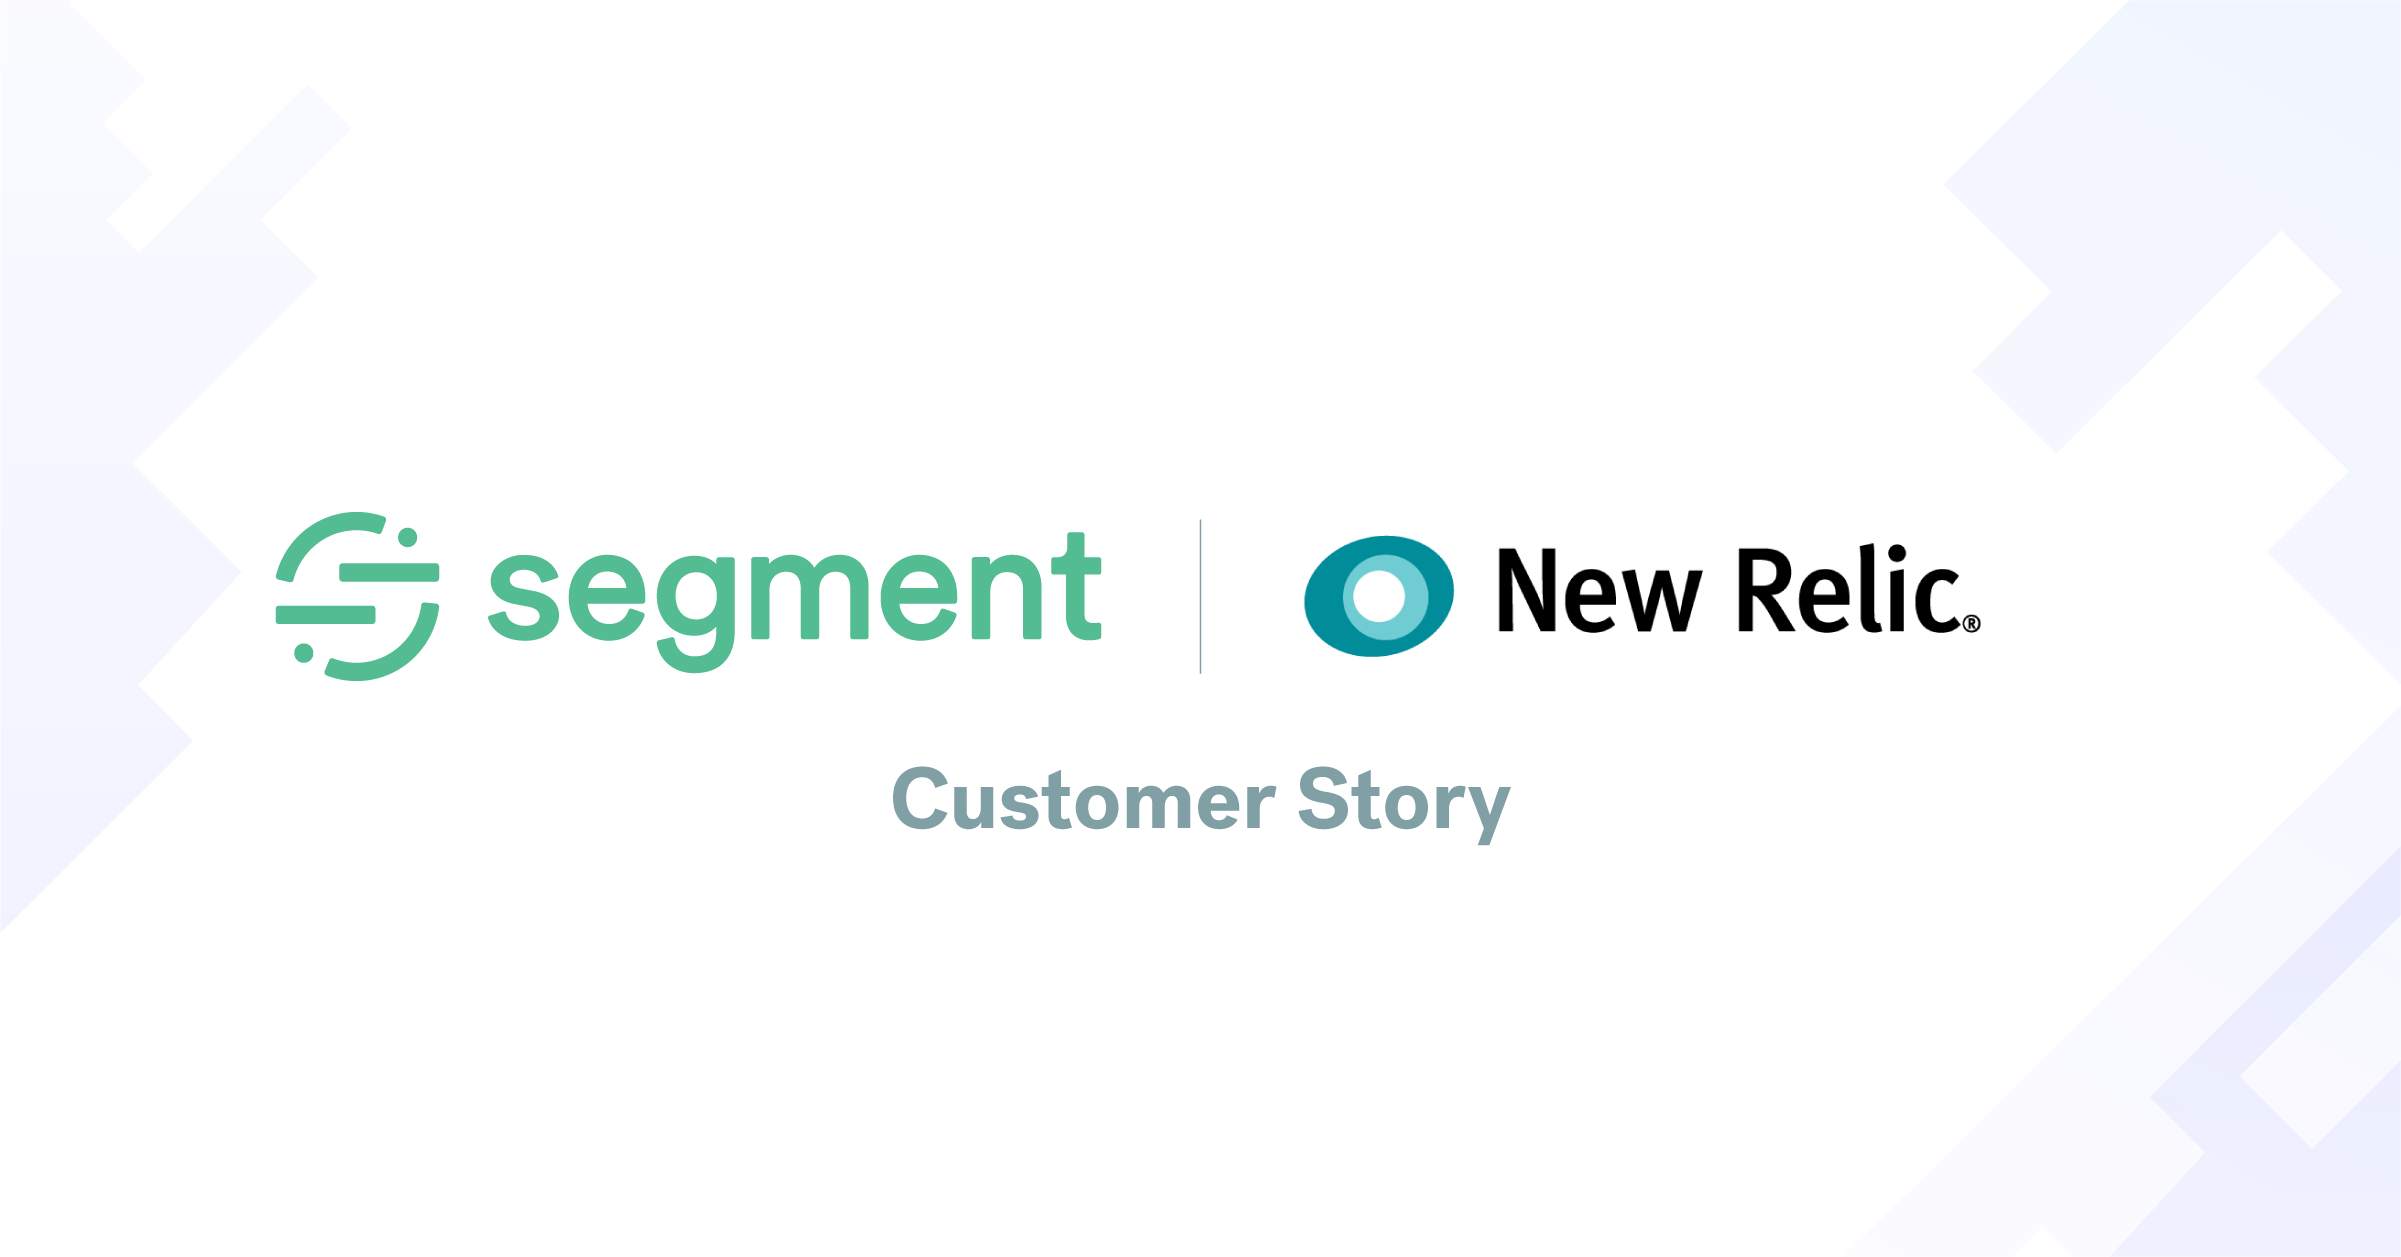 New Relic uses Segment as the core of its growth marketing technologies